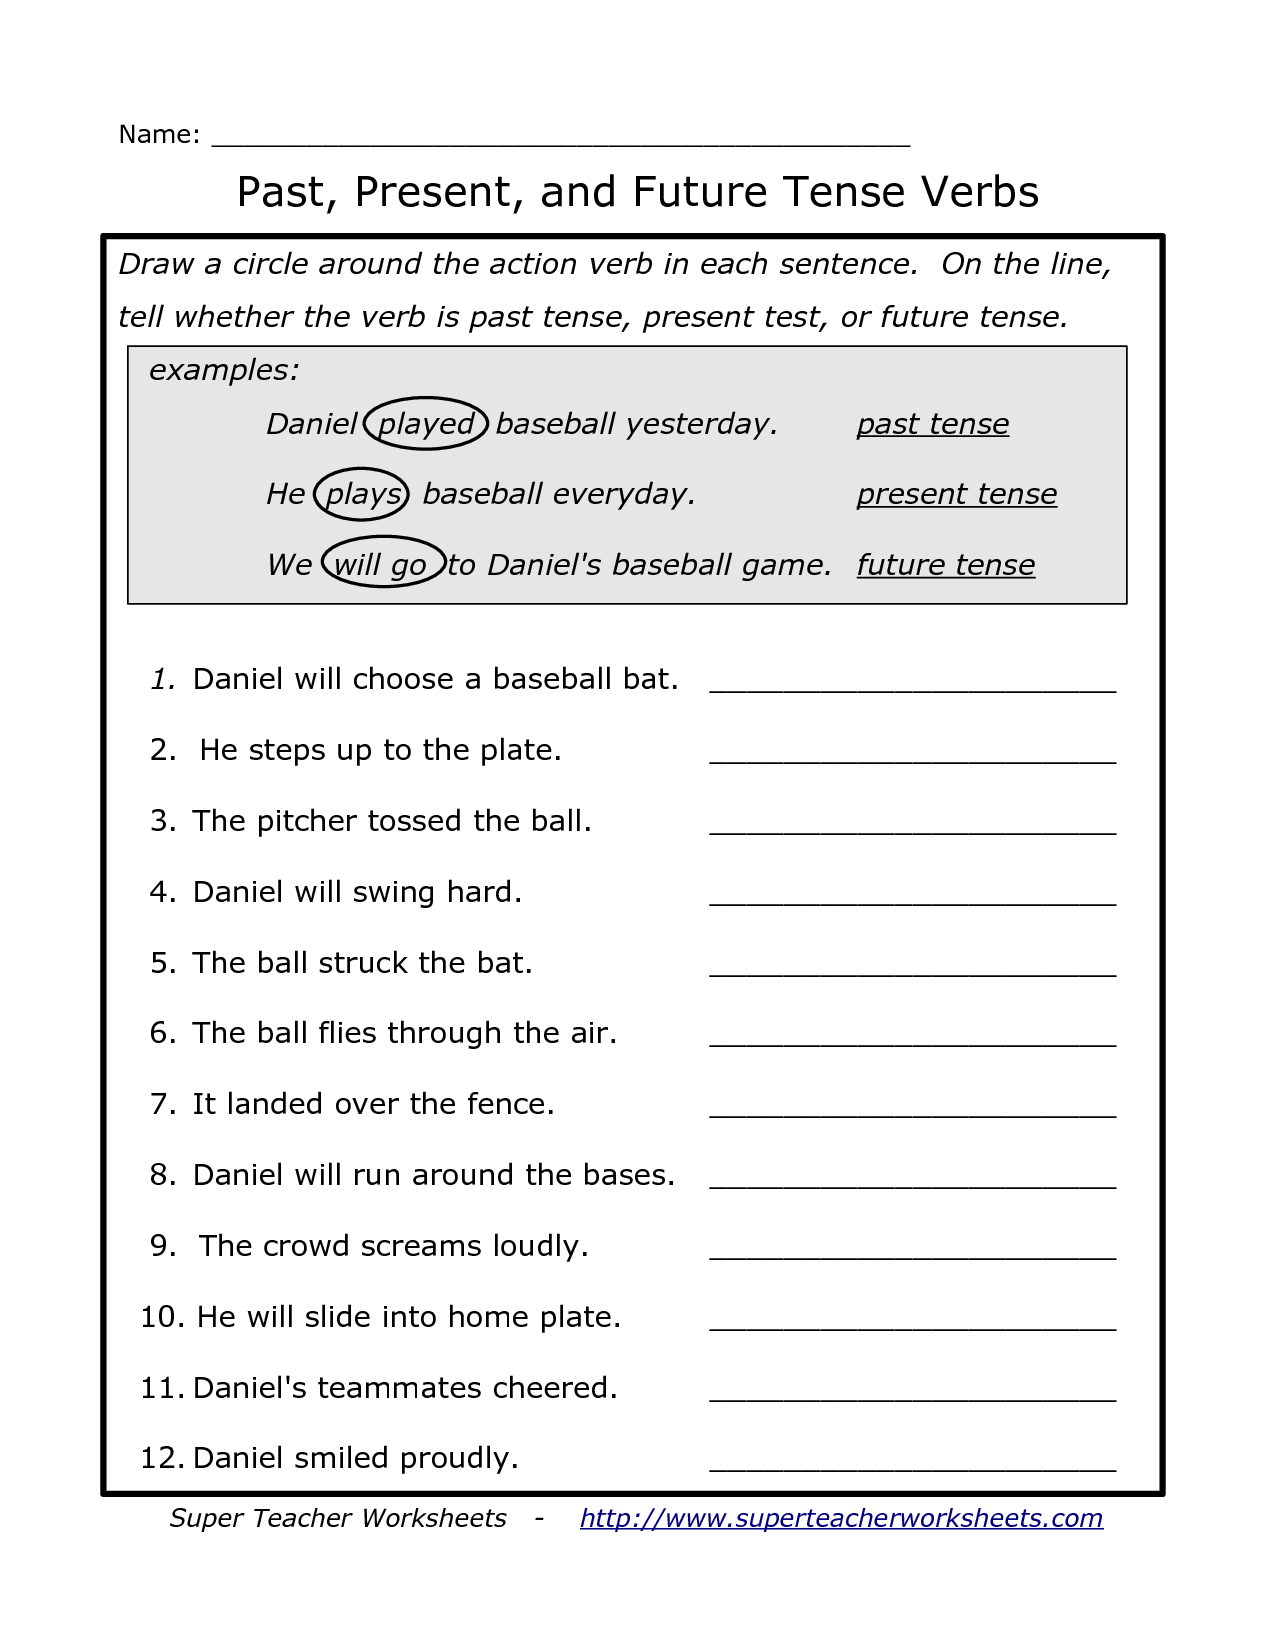 17-best-images-of-future-will-worksheets-french-future-simple-worksheet-past-present-tense